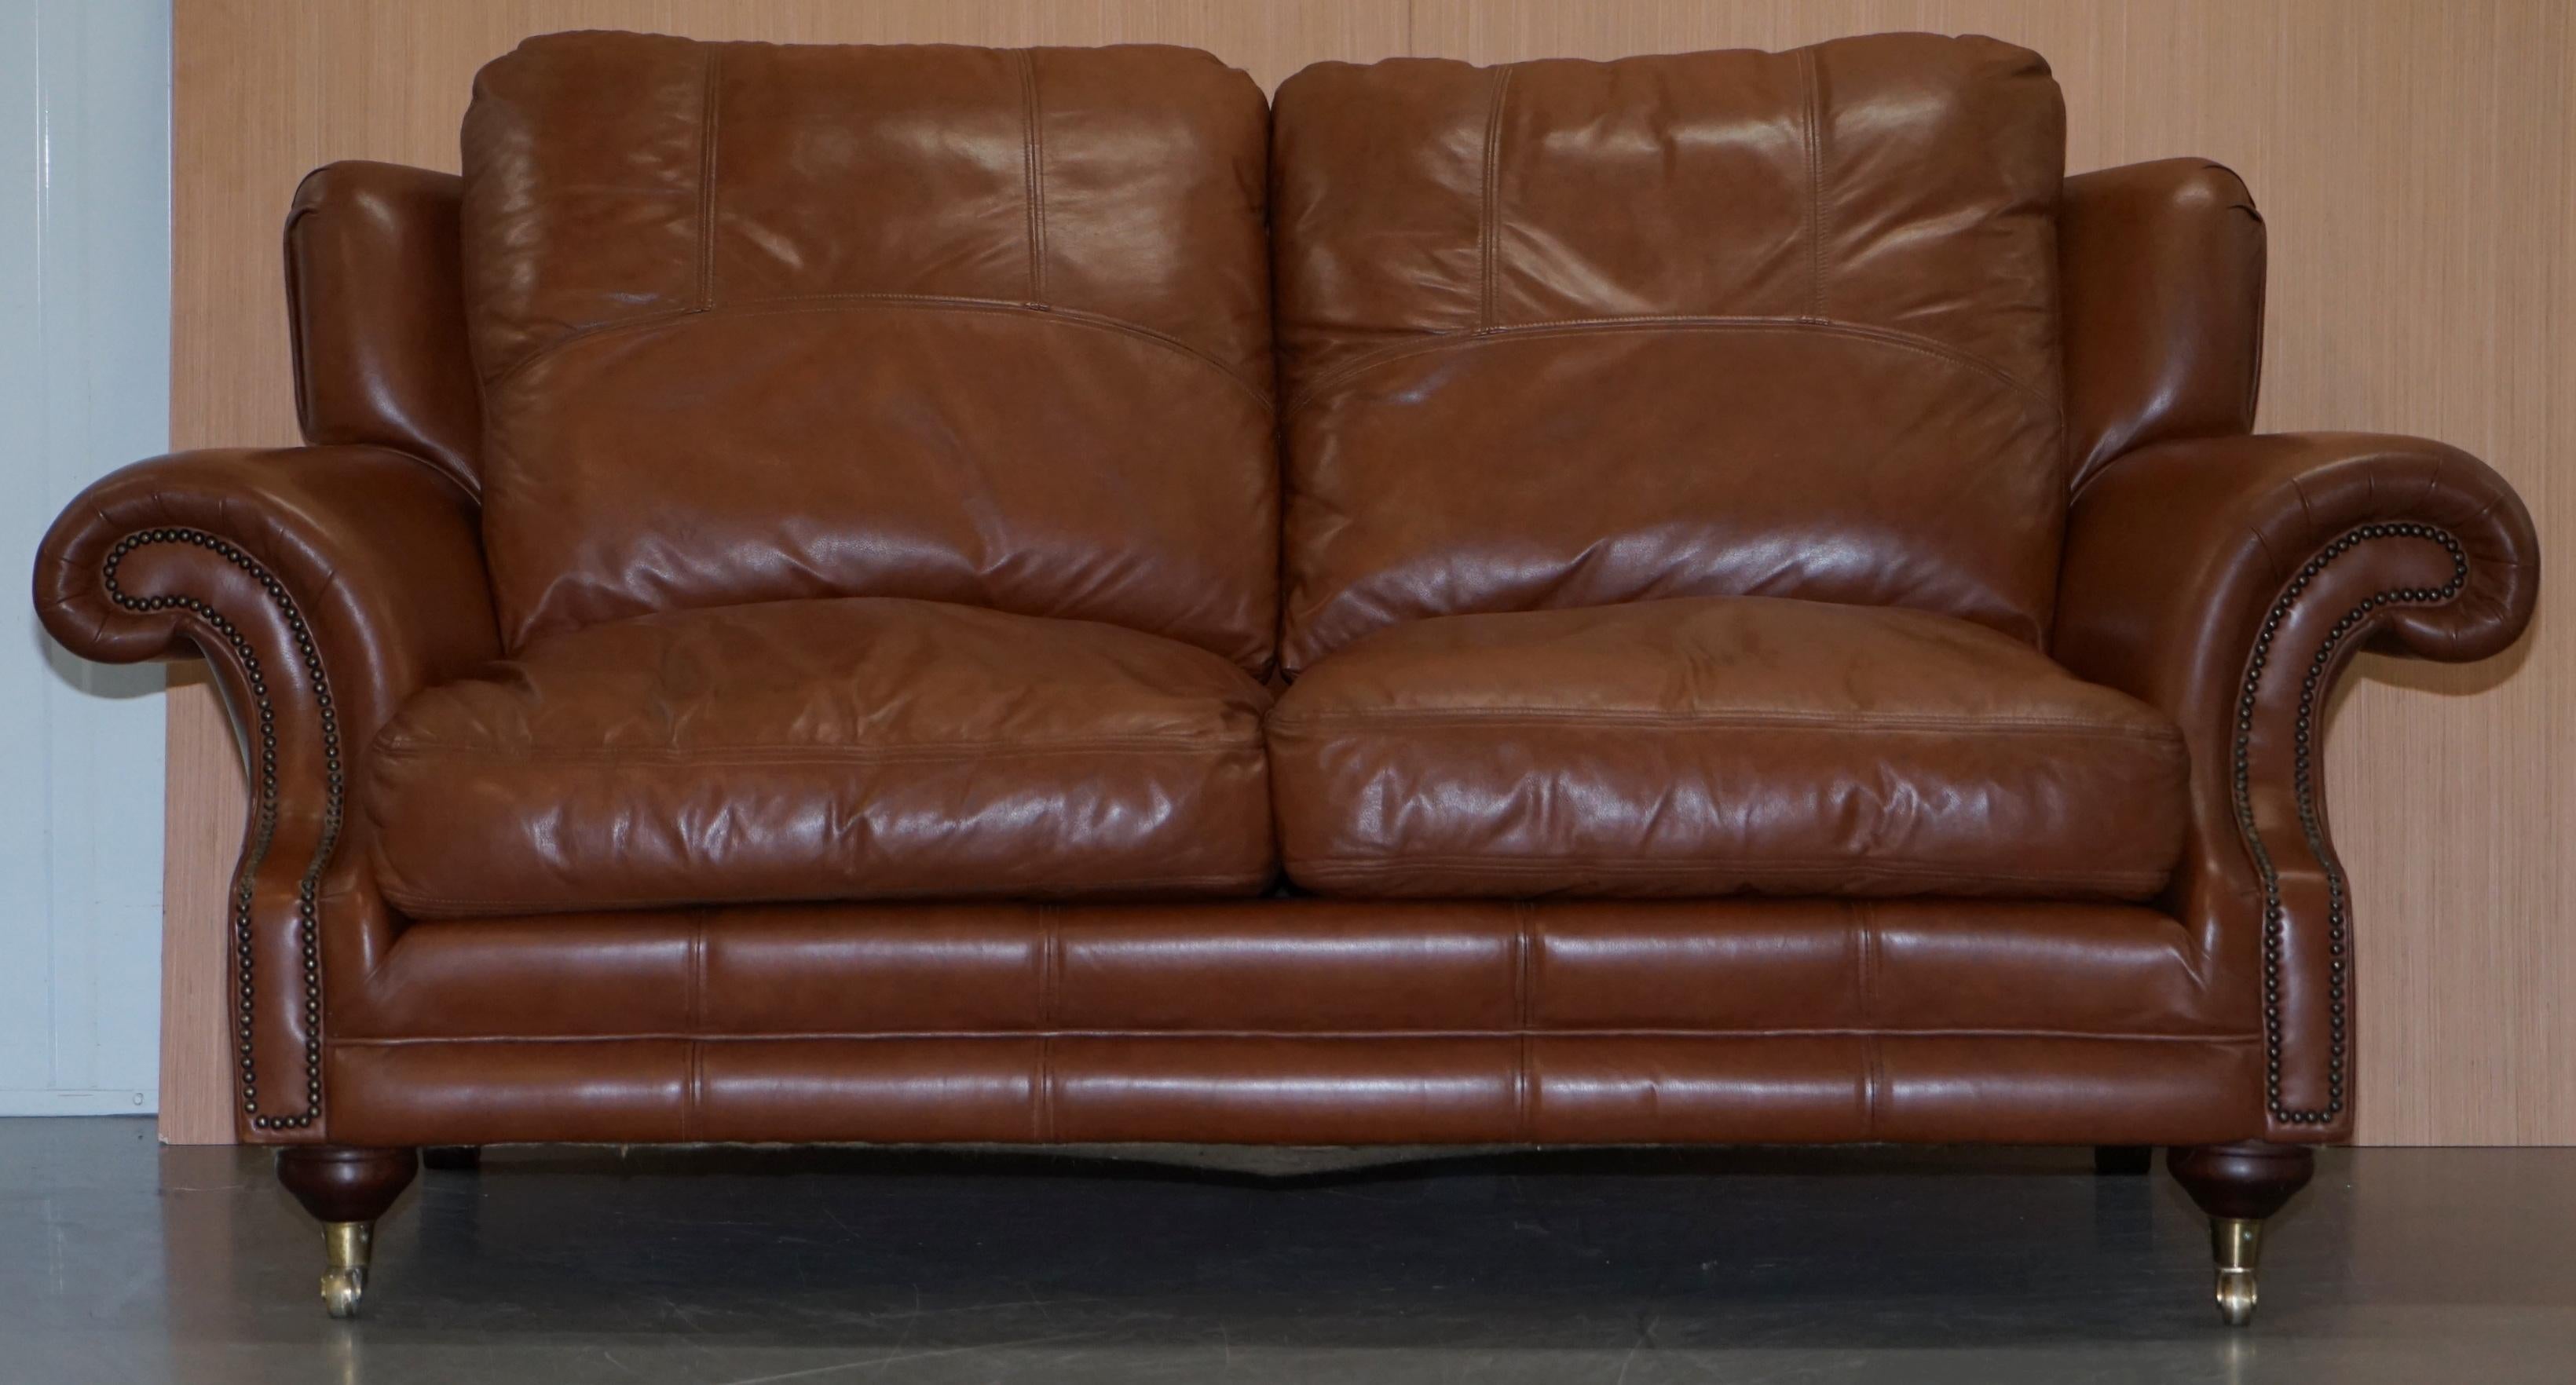 We are delighted to offer for sale this stunning RRP £3299 Medallion upholstery LTD San Remo Tan brown leather two-seat sofa which is part of a suite

The suite came from a rather prestigious clients mansion home in Chelsea, they had the home